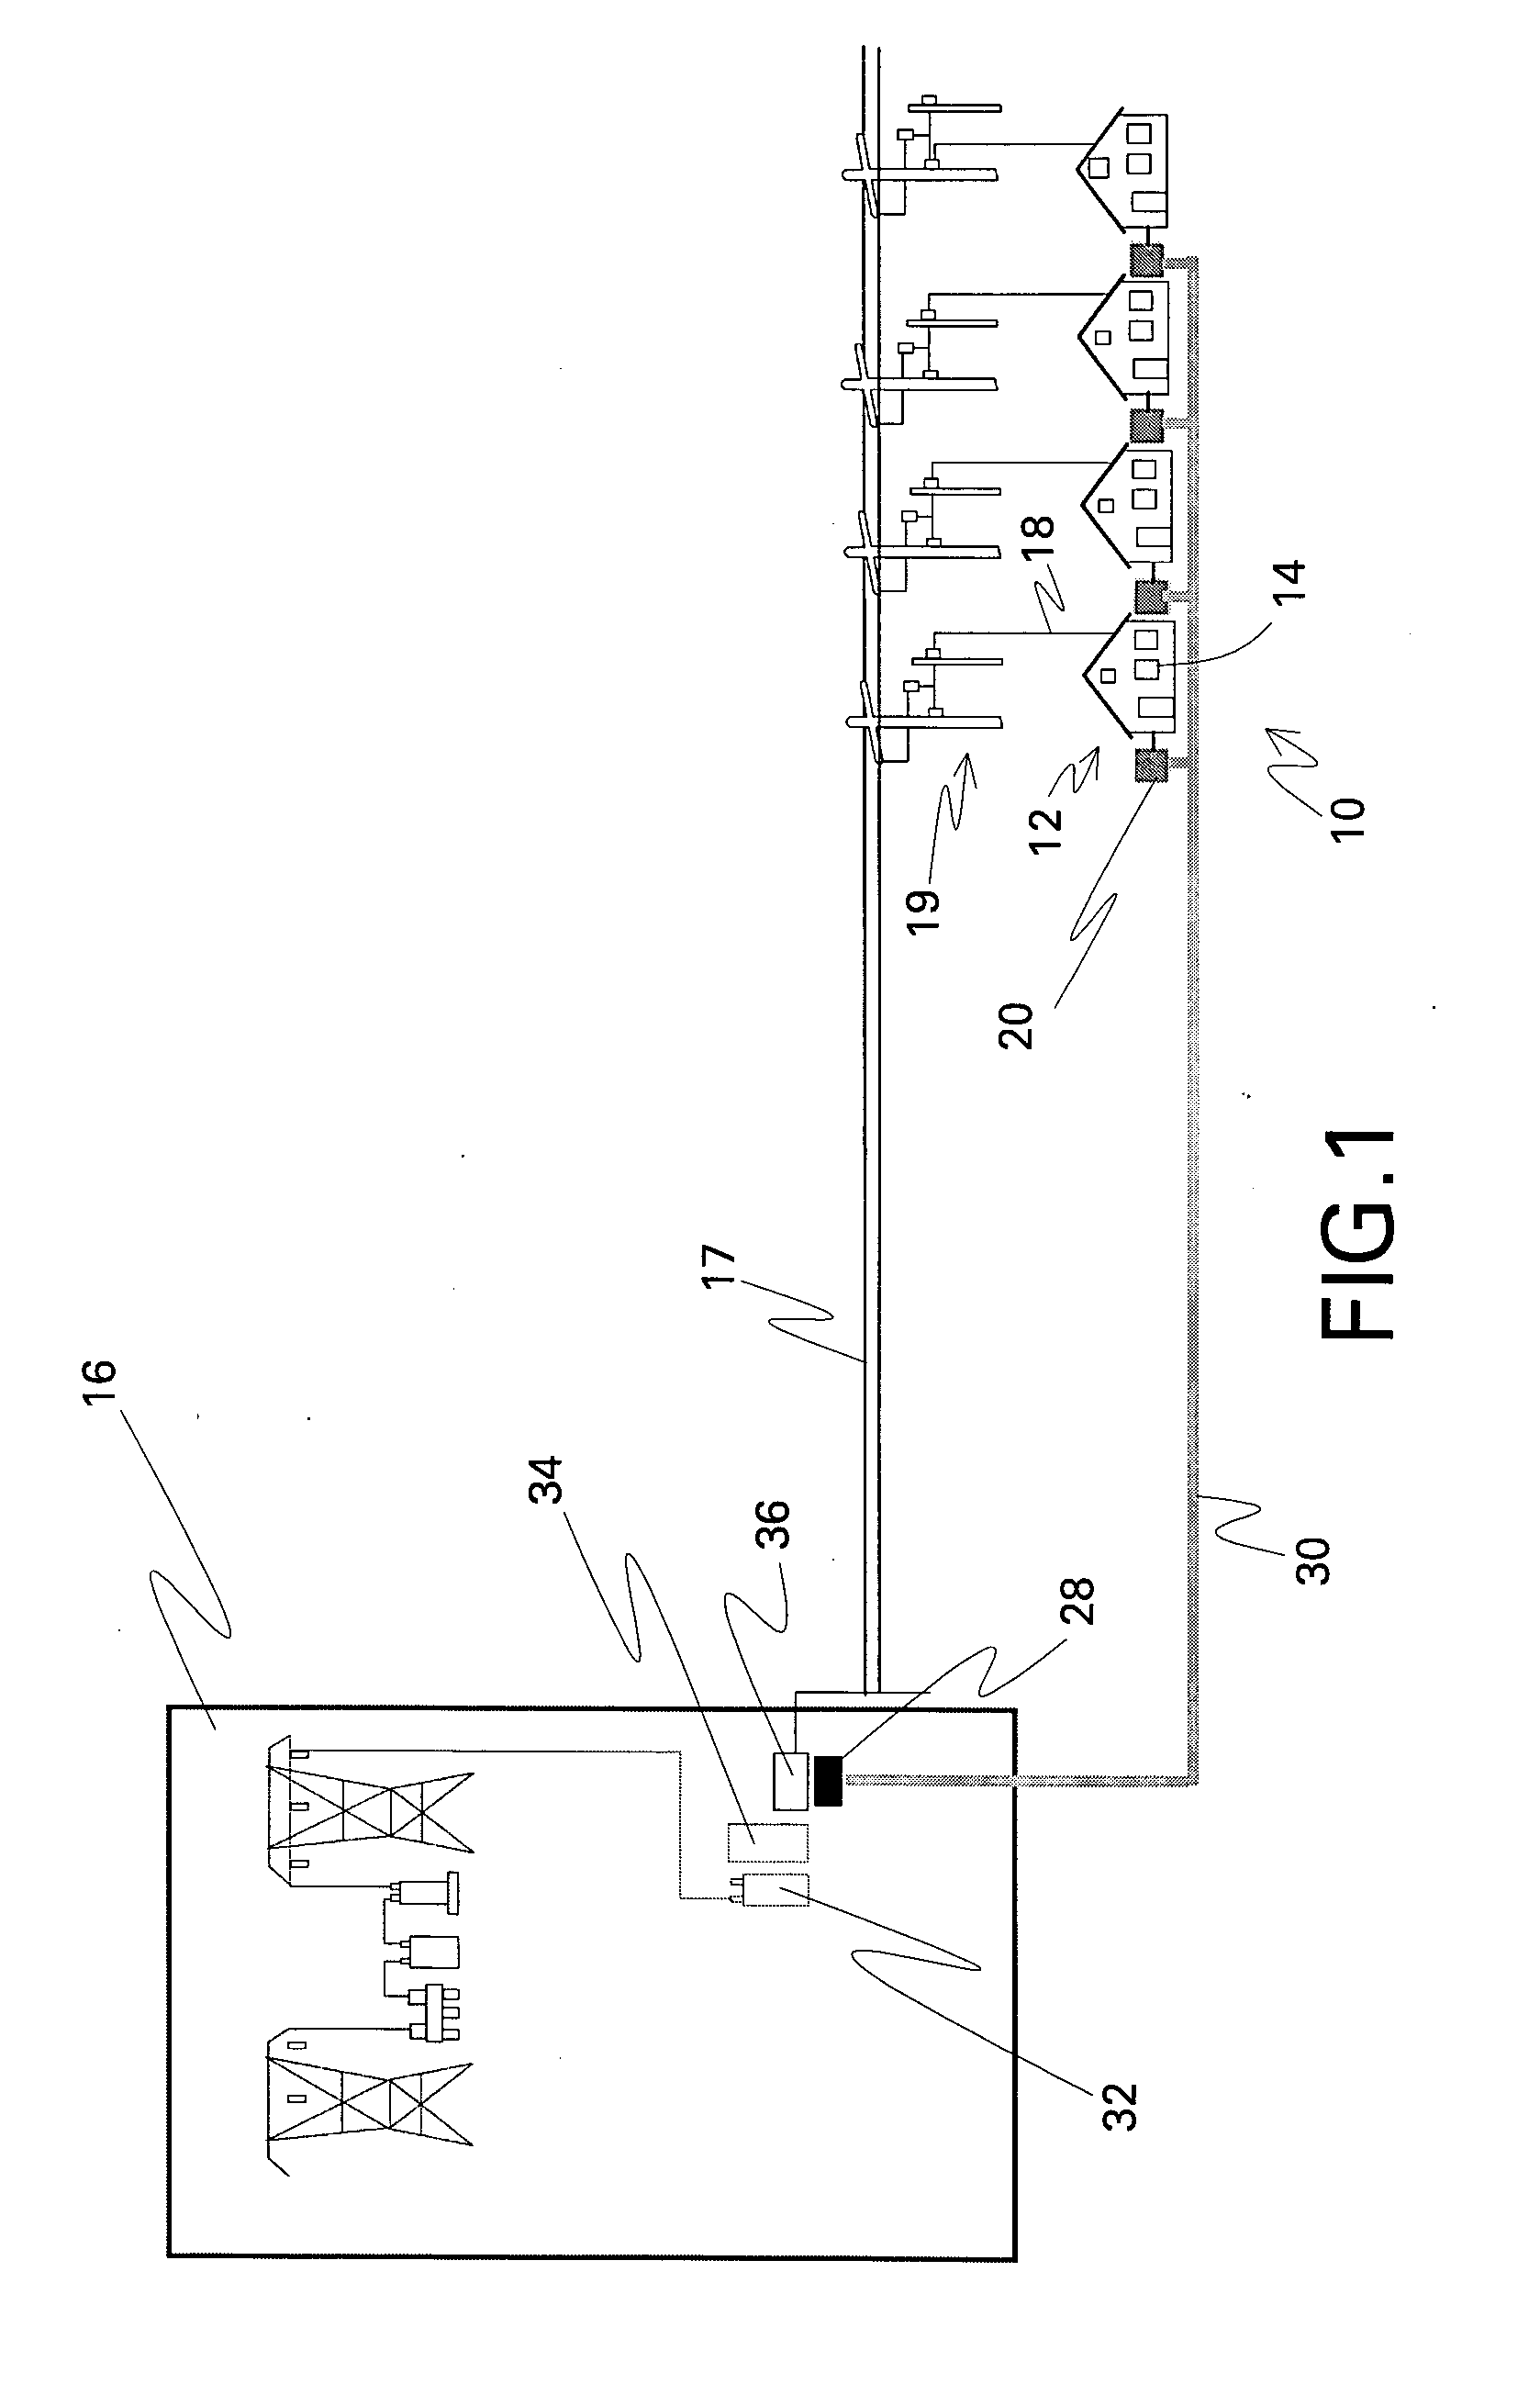 System and method for providing reactive power support with distributed energy resource inverter